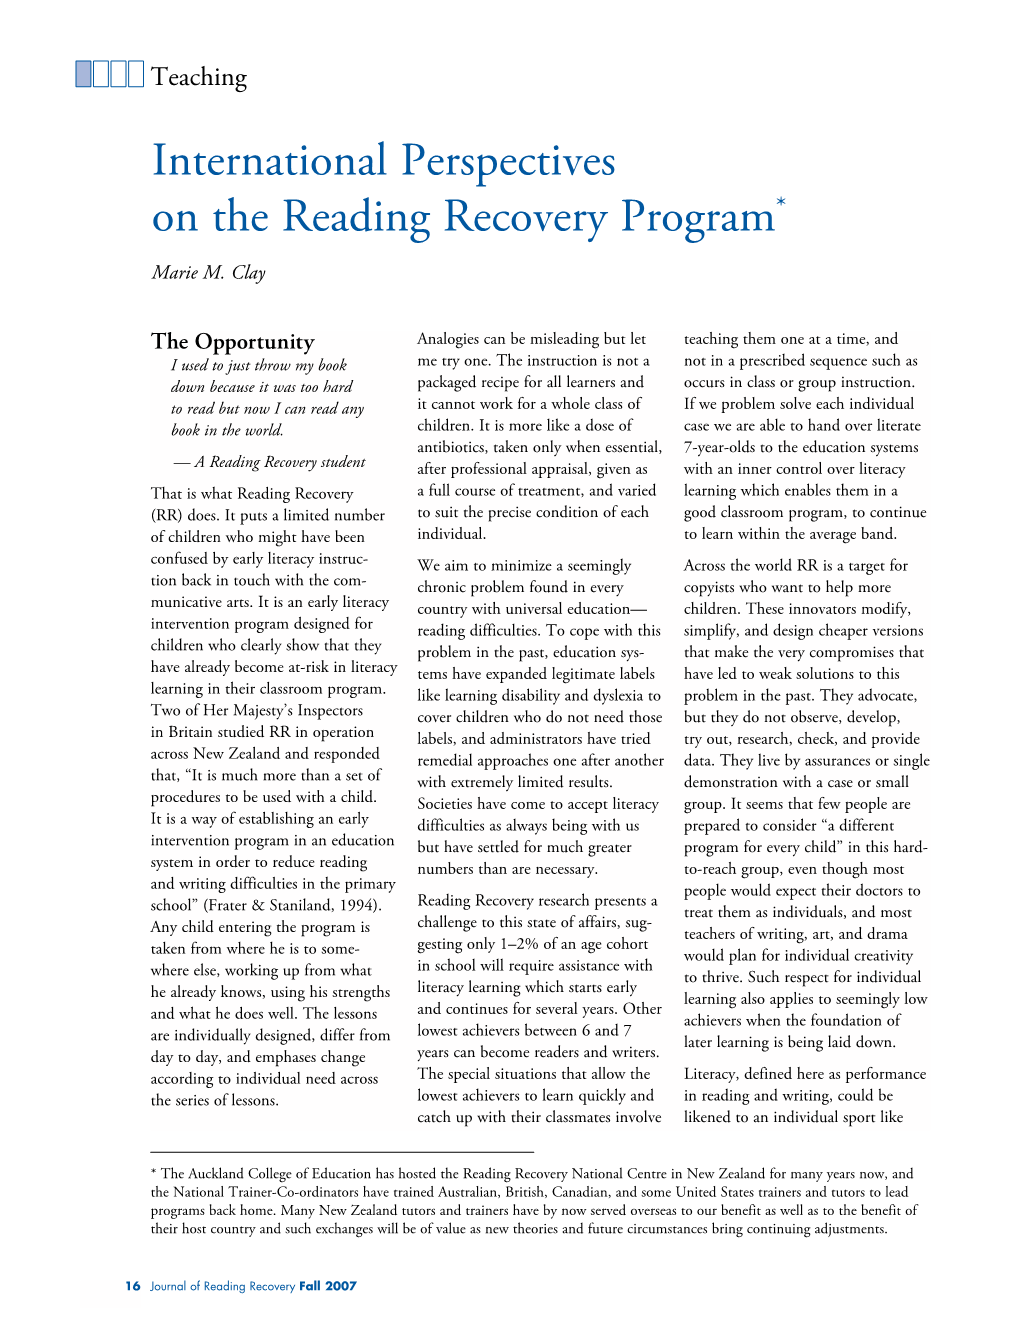 International Perspectives on the Reading Recovery Program* Marie M